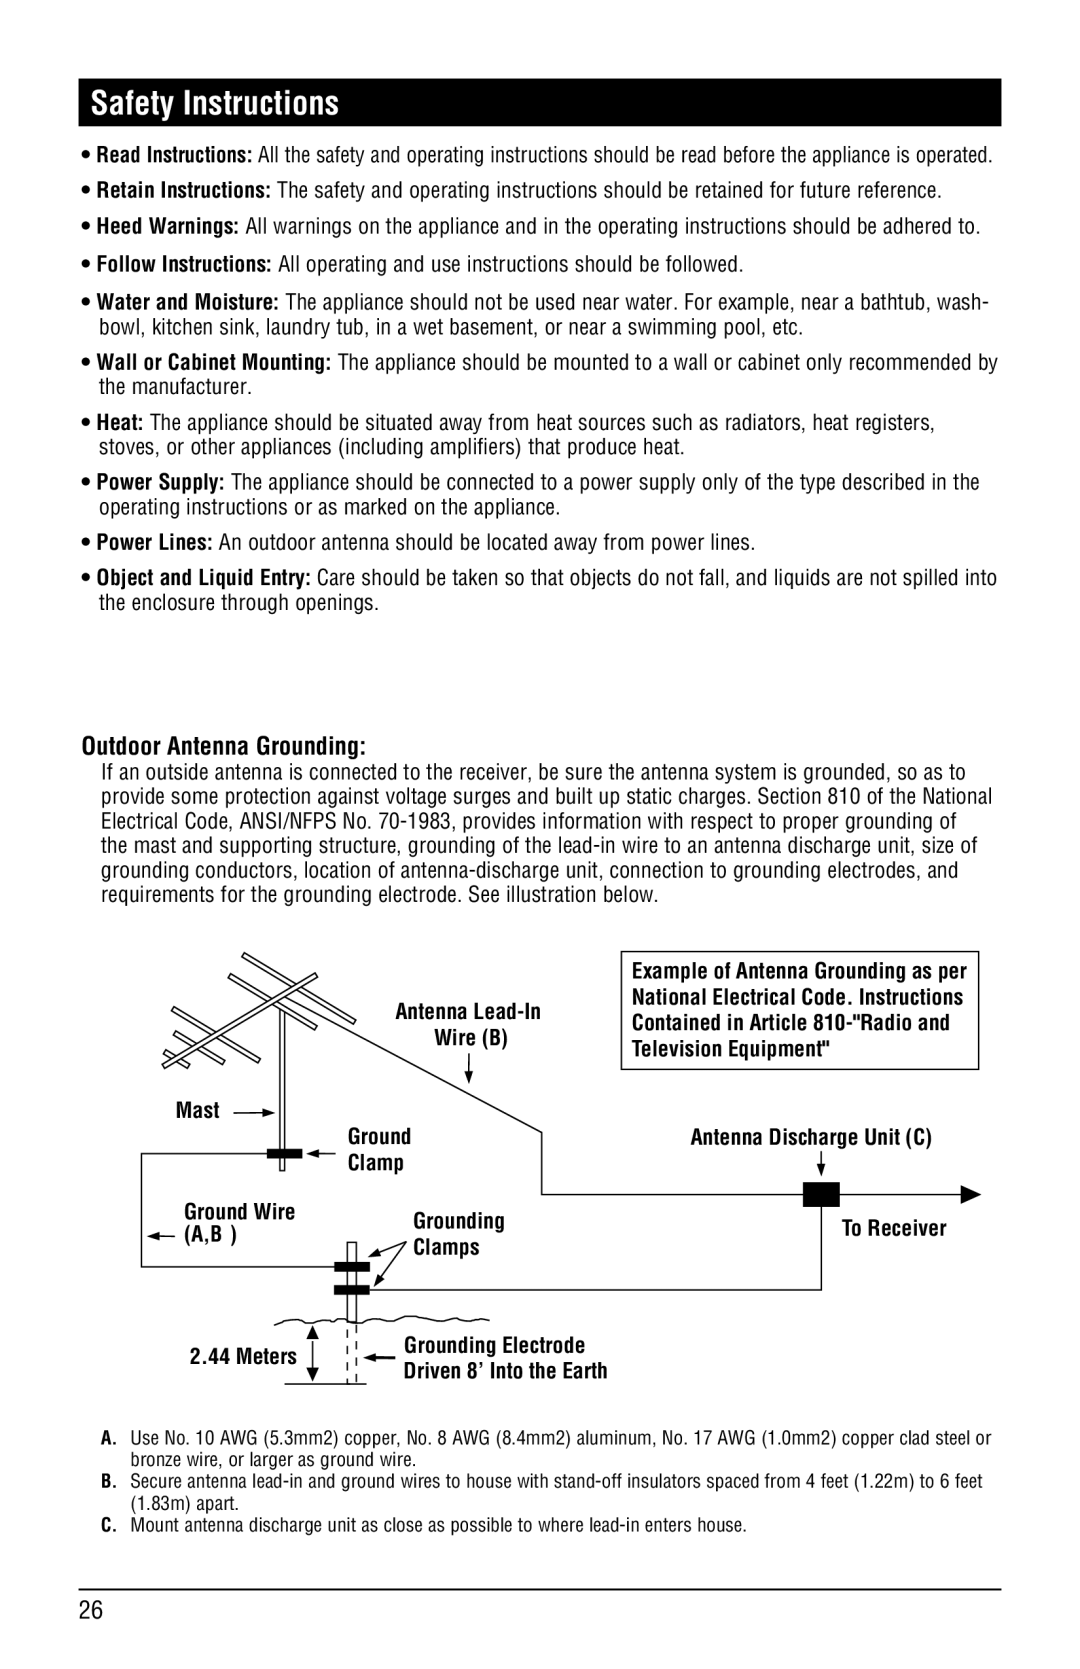 Linear RV4500 installation manual Safety Instructions, Outdoor Antenna Grounding 